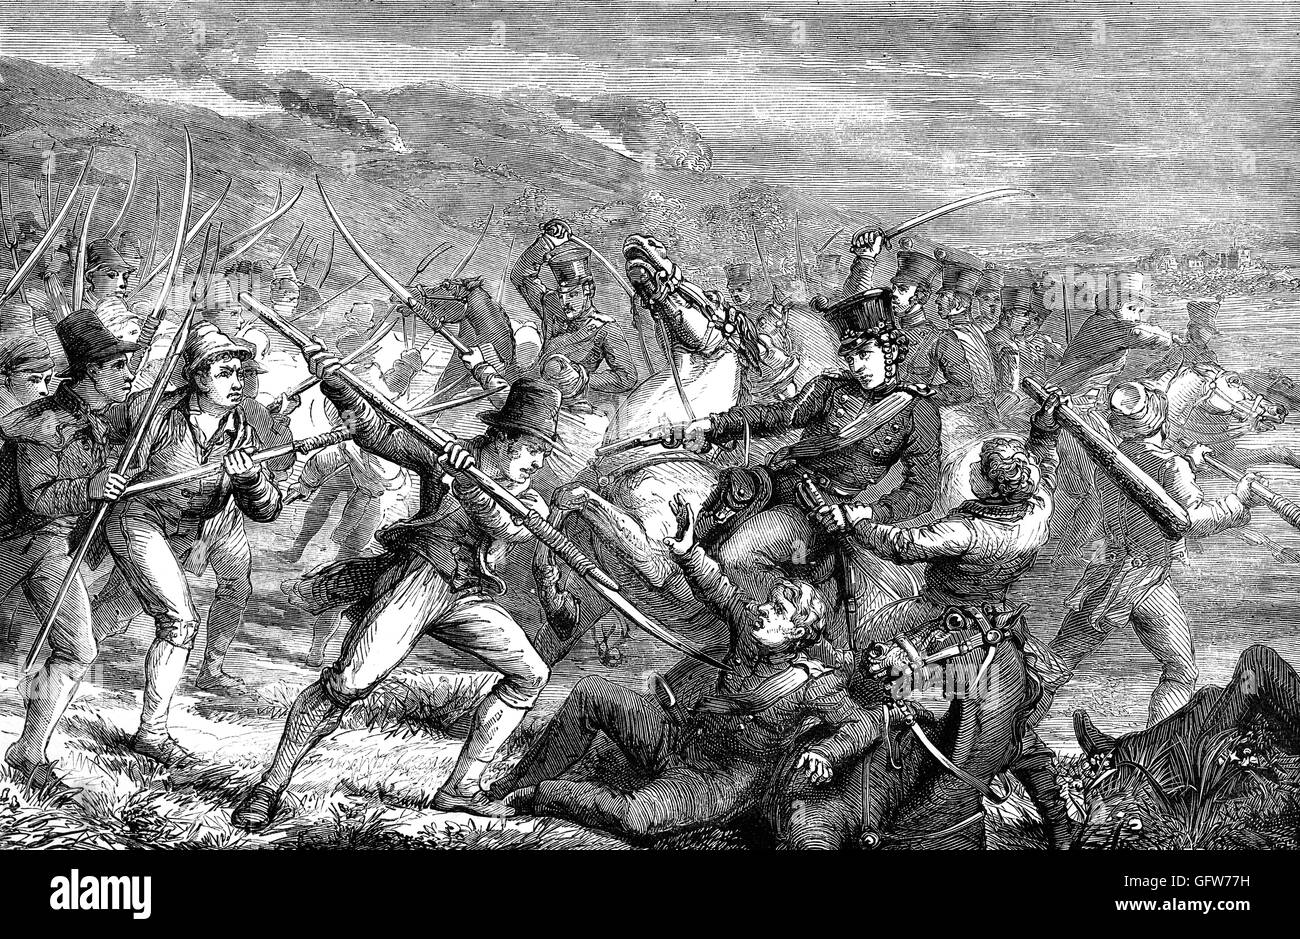 The Carrickshock incident, Carrickshock massacre, or battle of Carrickshock was a confrontation between the Irish Constabulary and local Catholic peasantry near Carrickshock, near Hugginstown, County Kilkenny on 14 December 1831, during the Tithe War in Ireland. Seventeen were killed: 14 of the party attempting to collect tithes and three of the crowd of locals who confronted them. Stock Photo